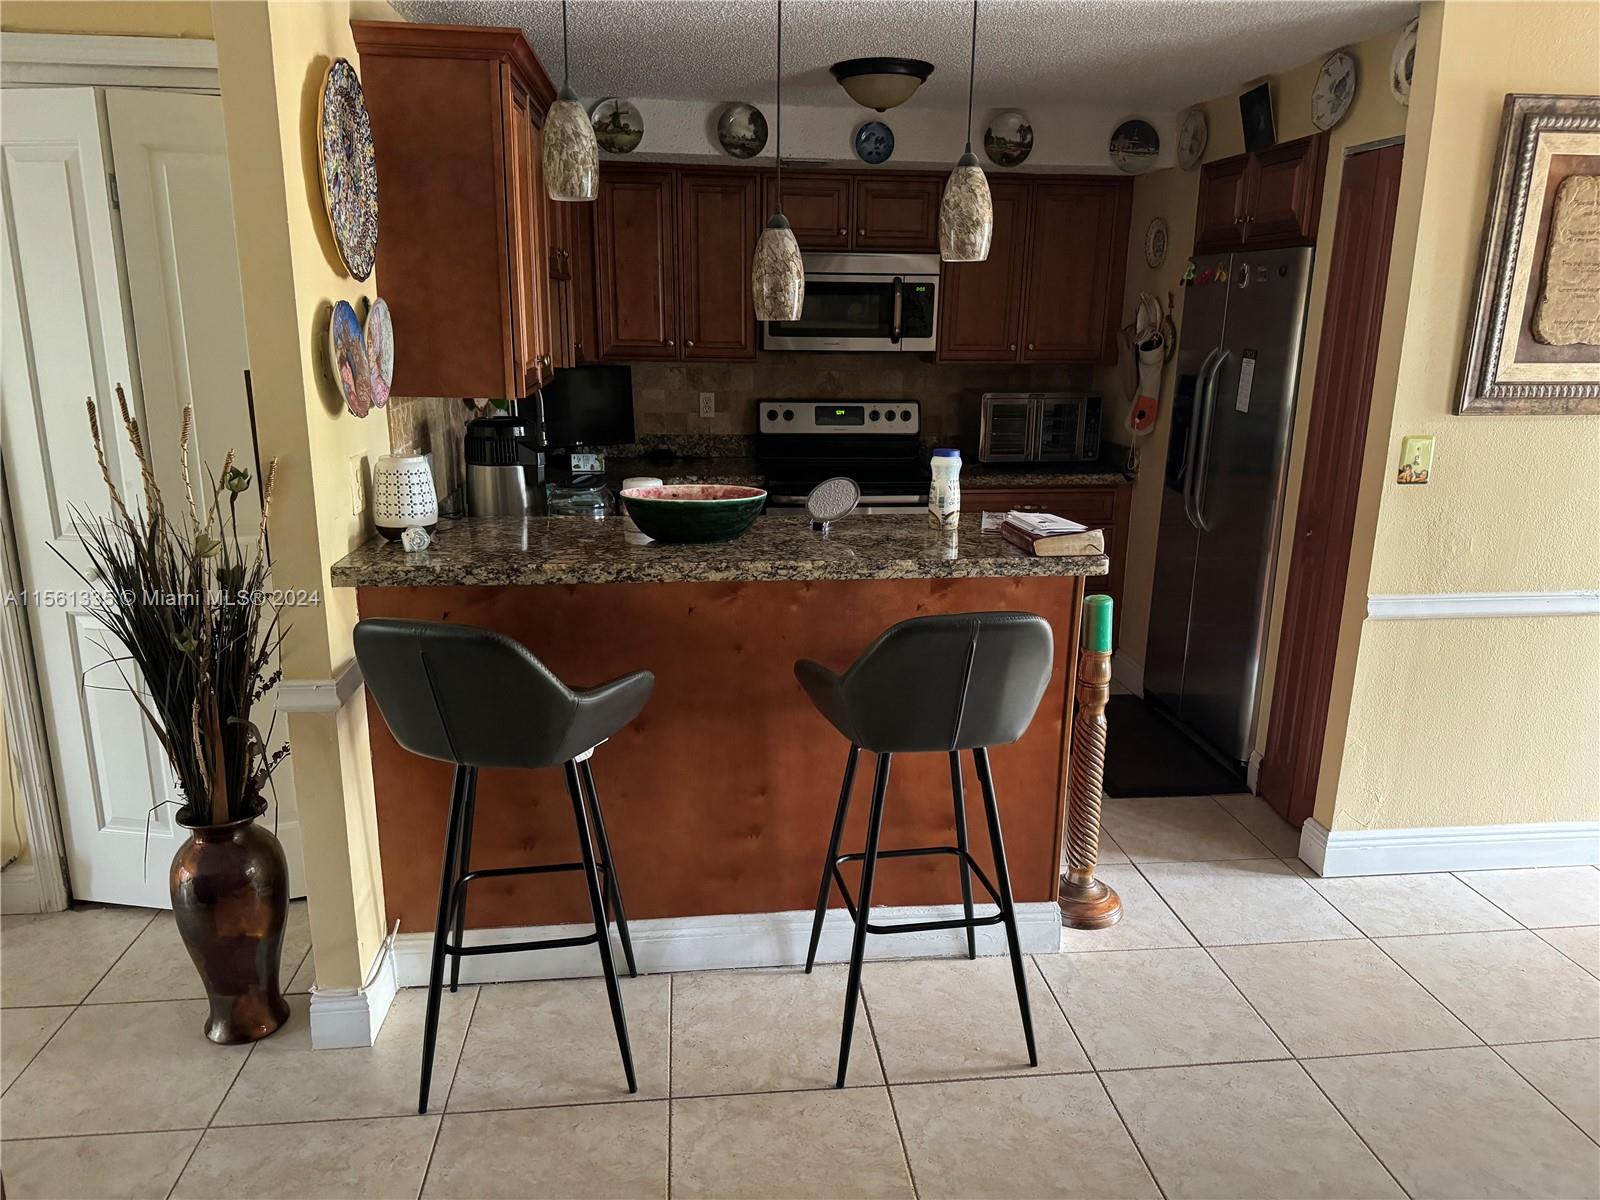 a kitchen with stainless steel appliances granite countertop table chairs and a refrigerator